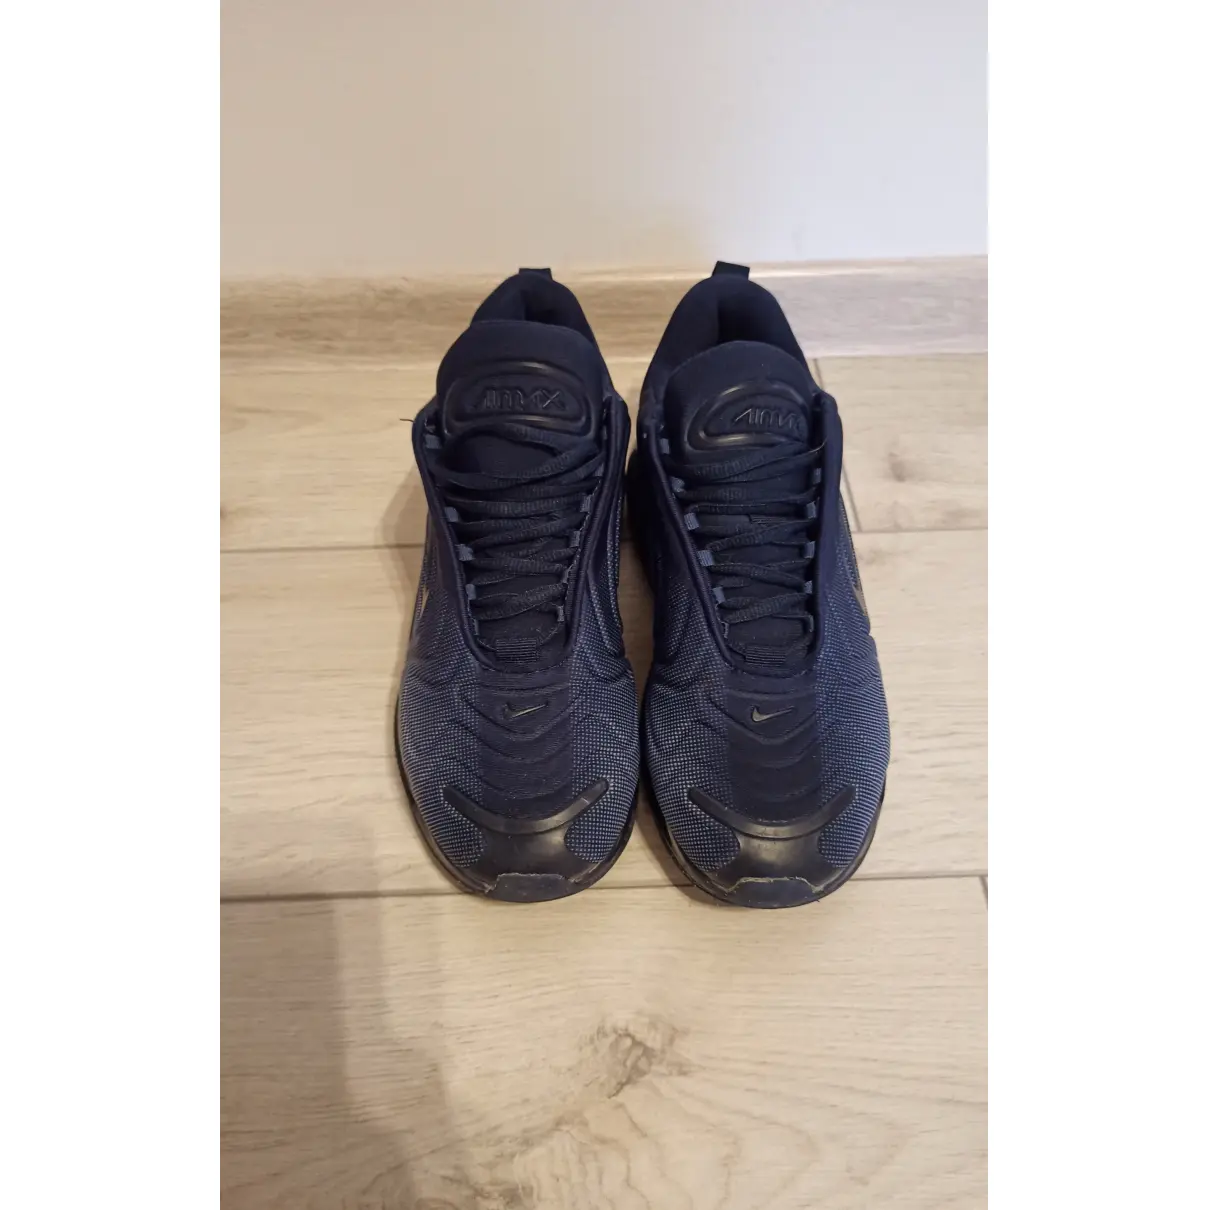 Buy Nike Air Max 720 trainers online